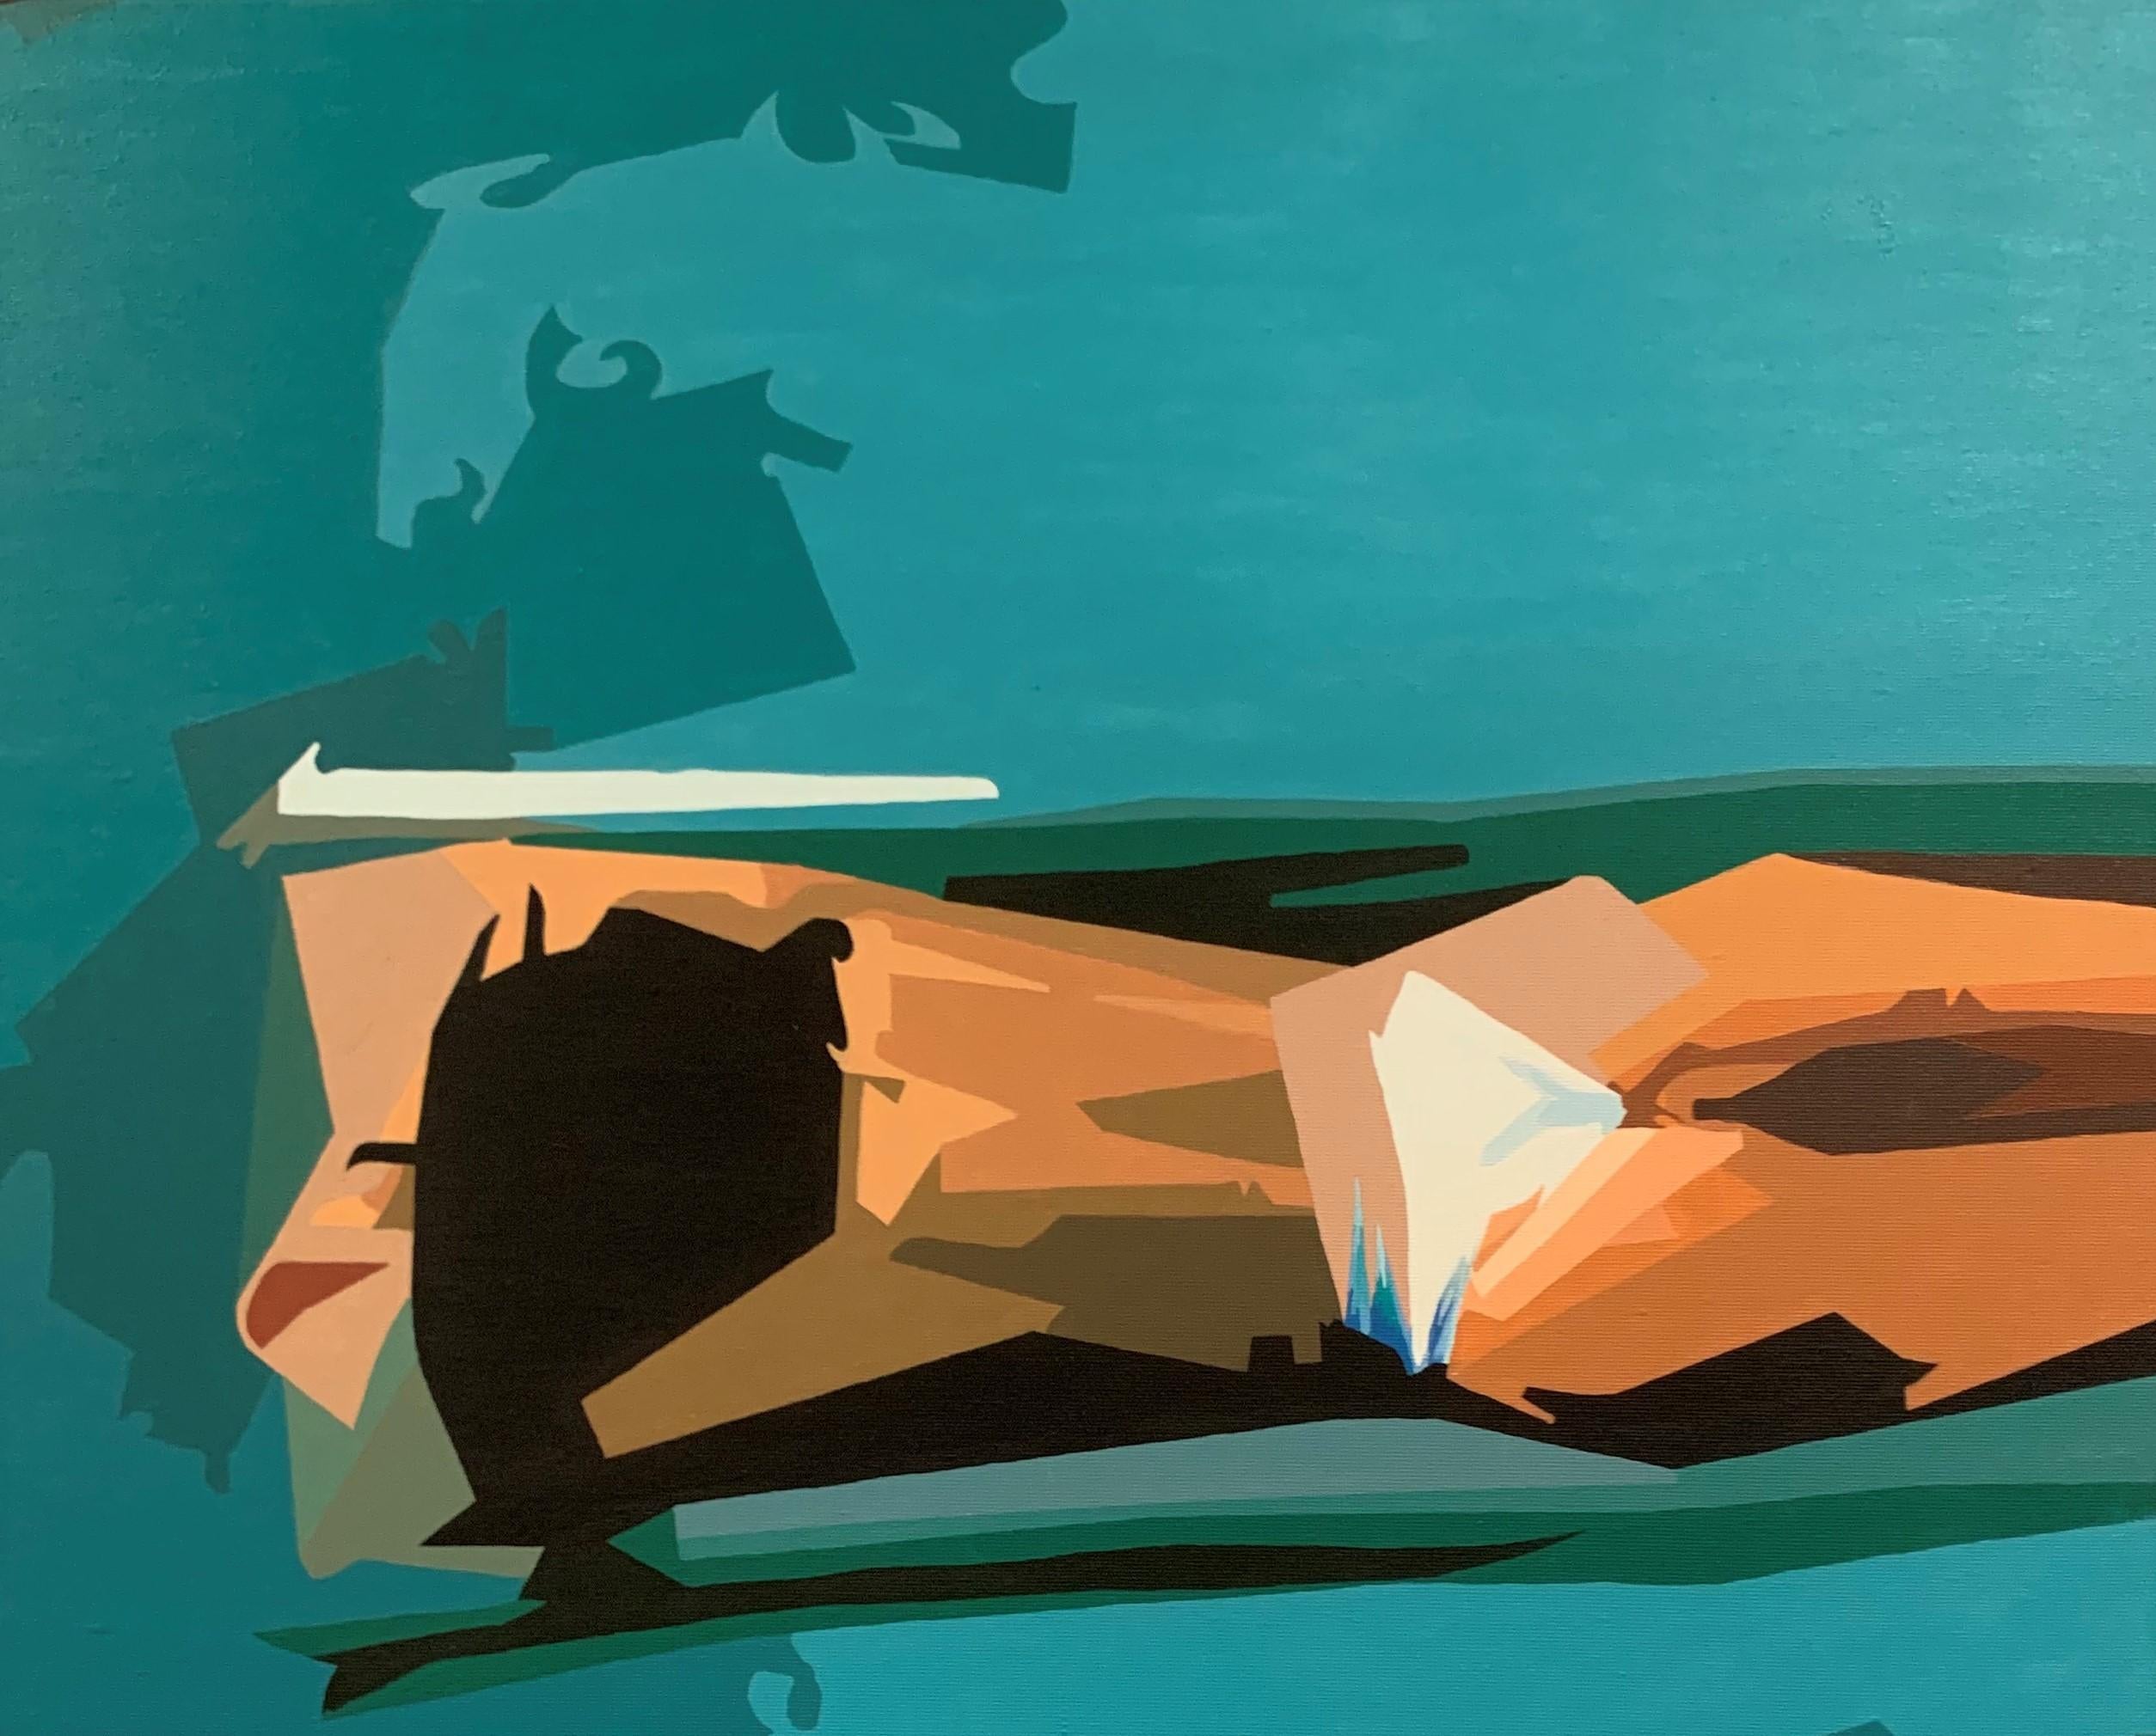 [un]Easy - 21st Century, Contemporary Painting, Sun, Pool, Water, Seaside - Blue Figurative Painting by Radu Rodideal